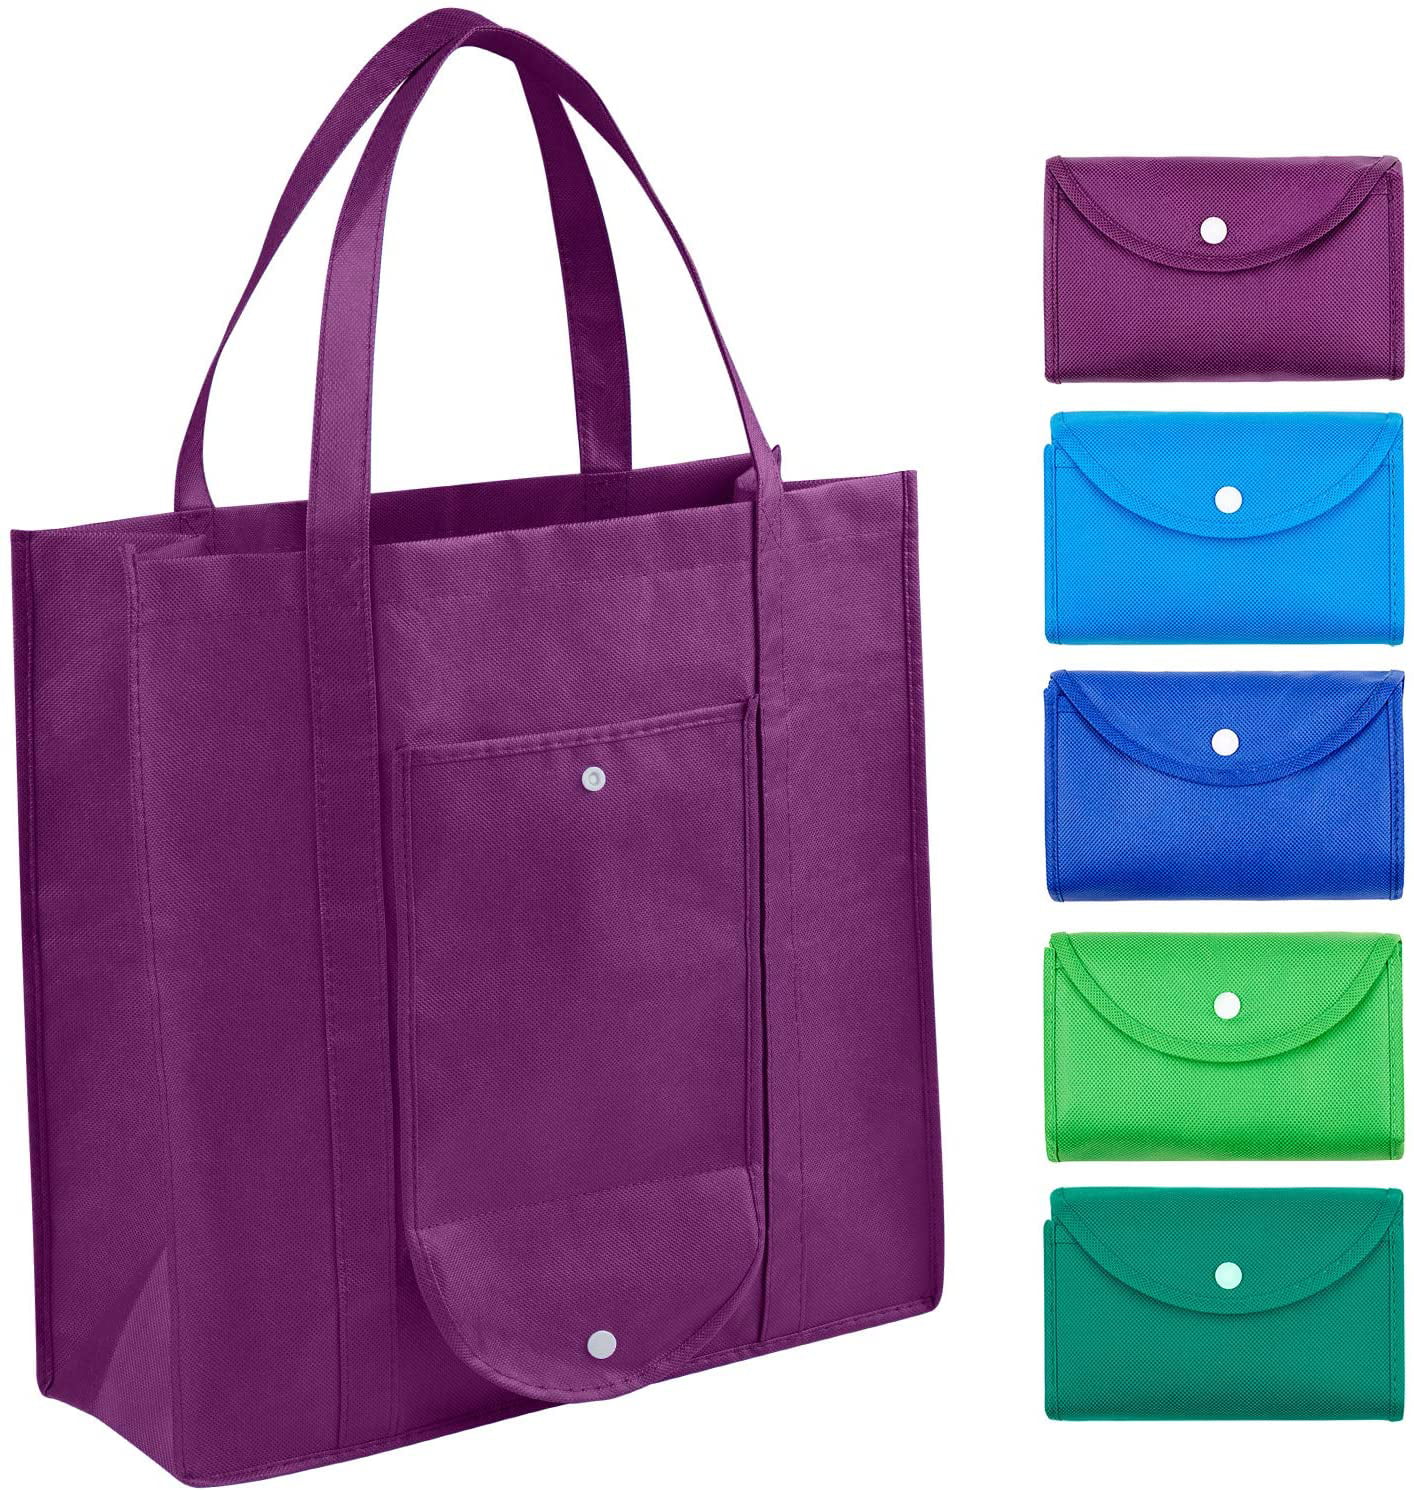 Foldable Shopping Bag Eco Friendly Reusable Storage Tote Travel Home Friut Pouch 